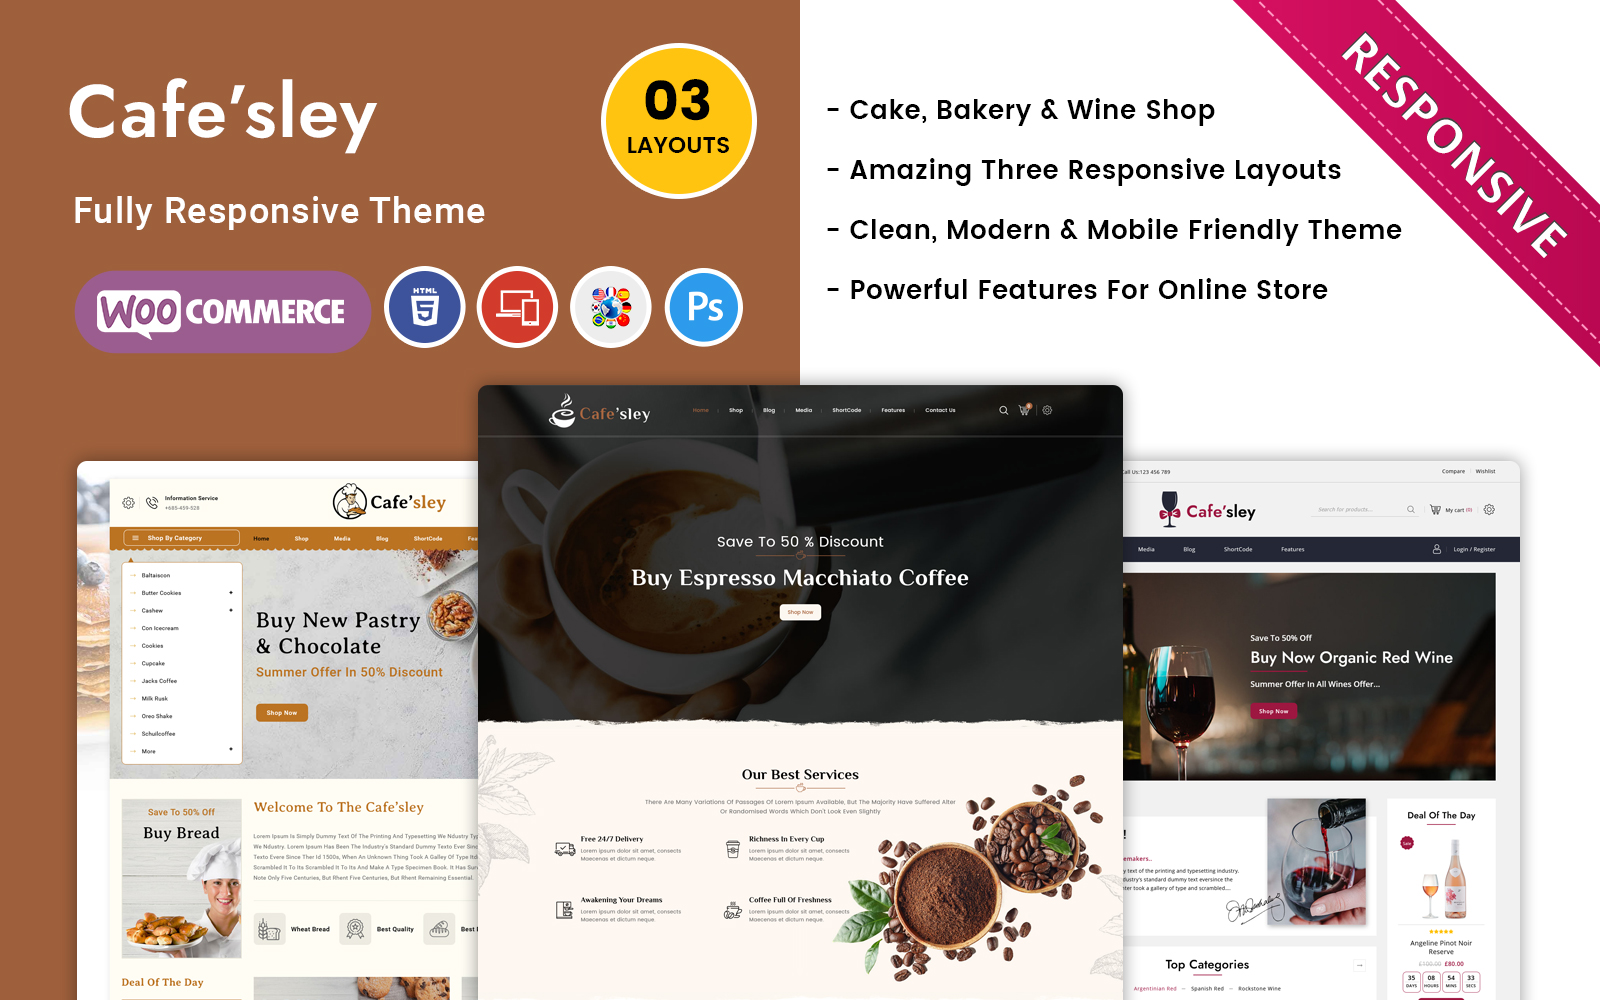 Cafesley - Cafe, Bar and Restraunt Woocommerce Theme